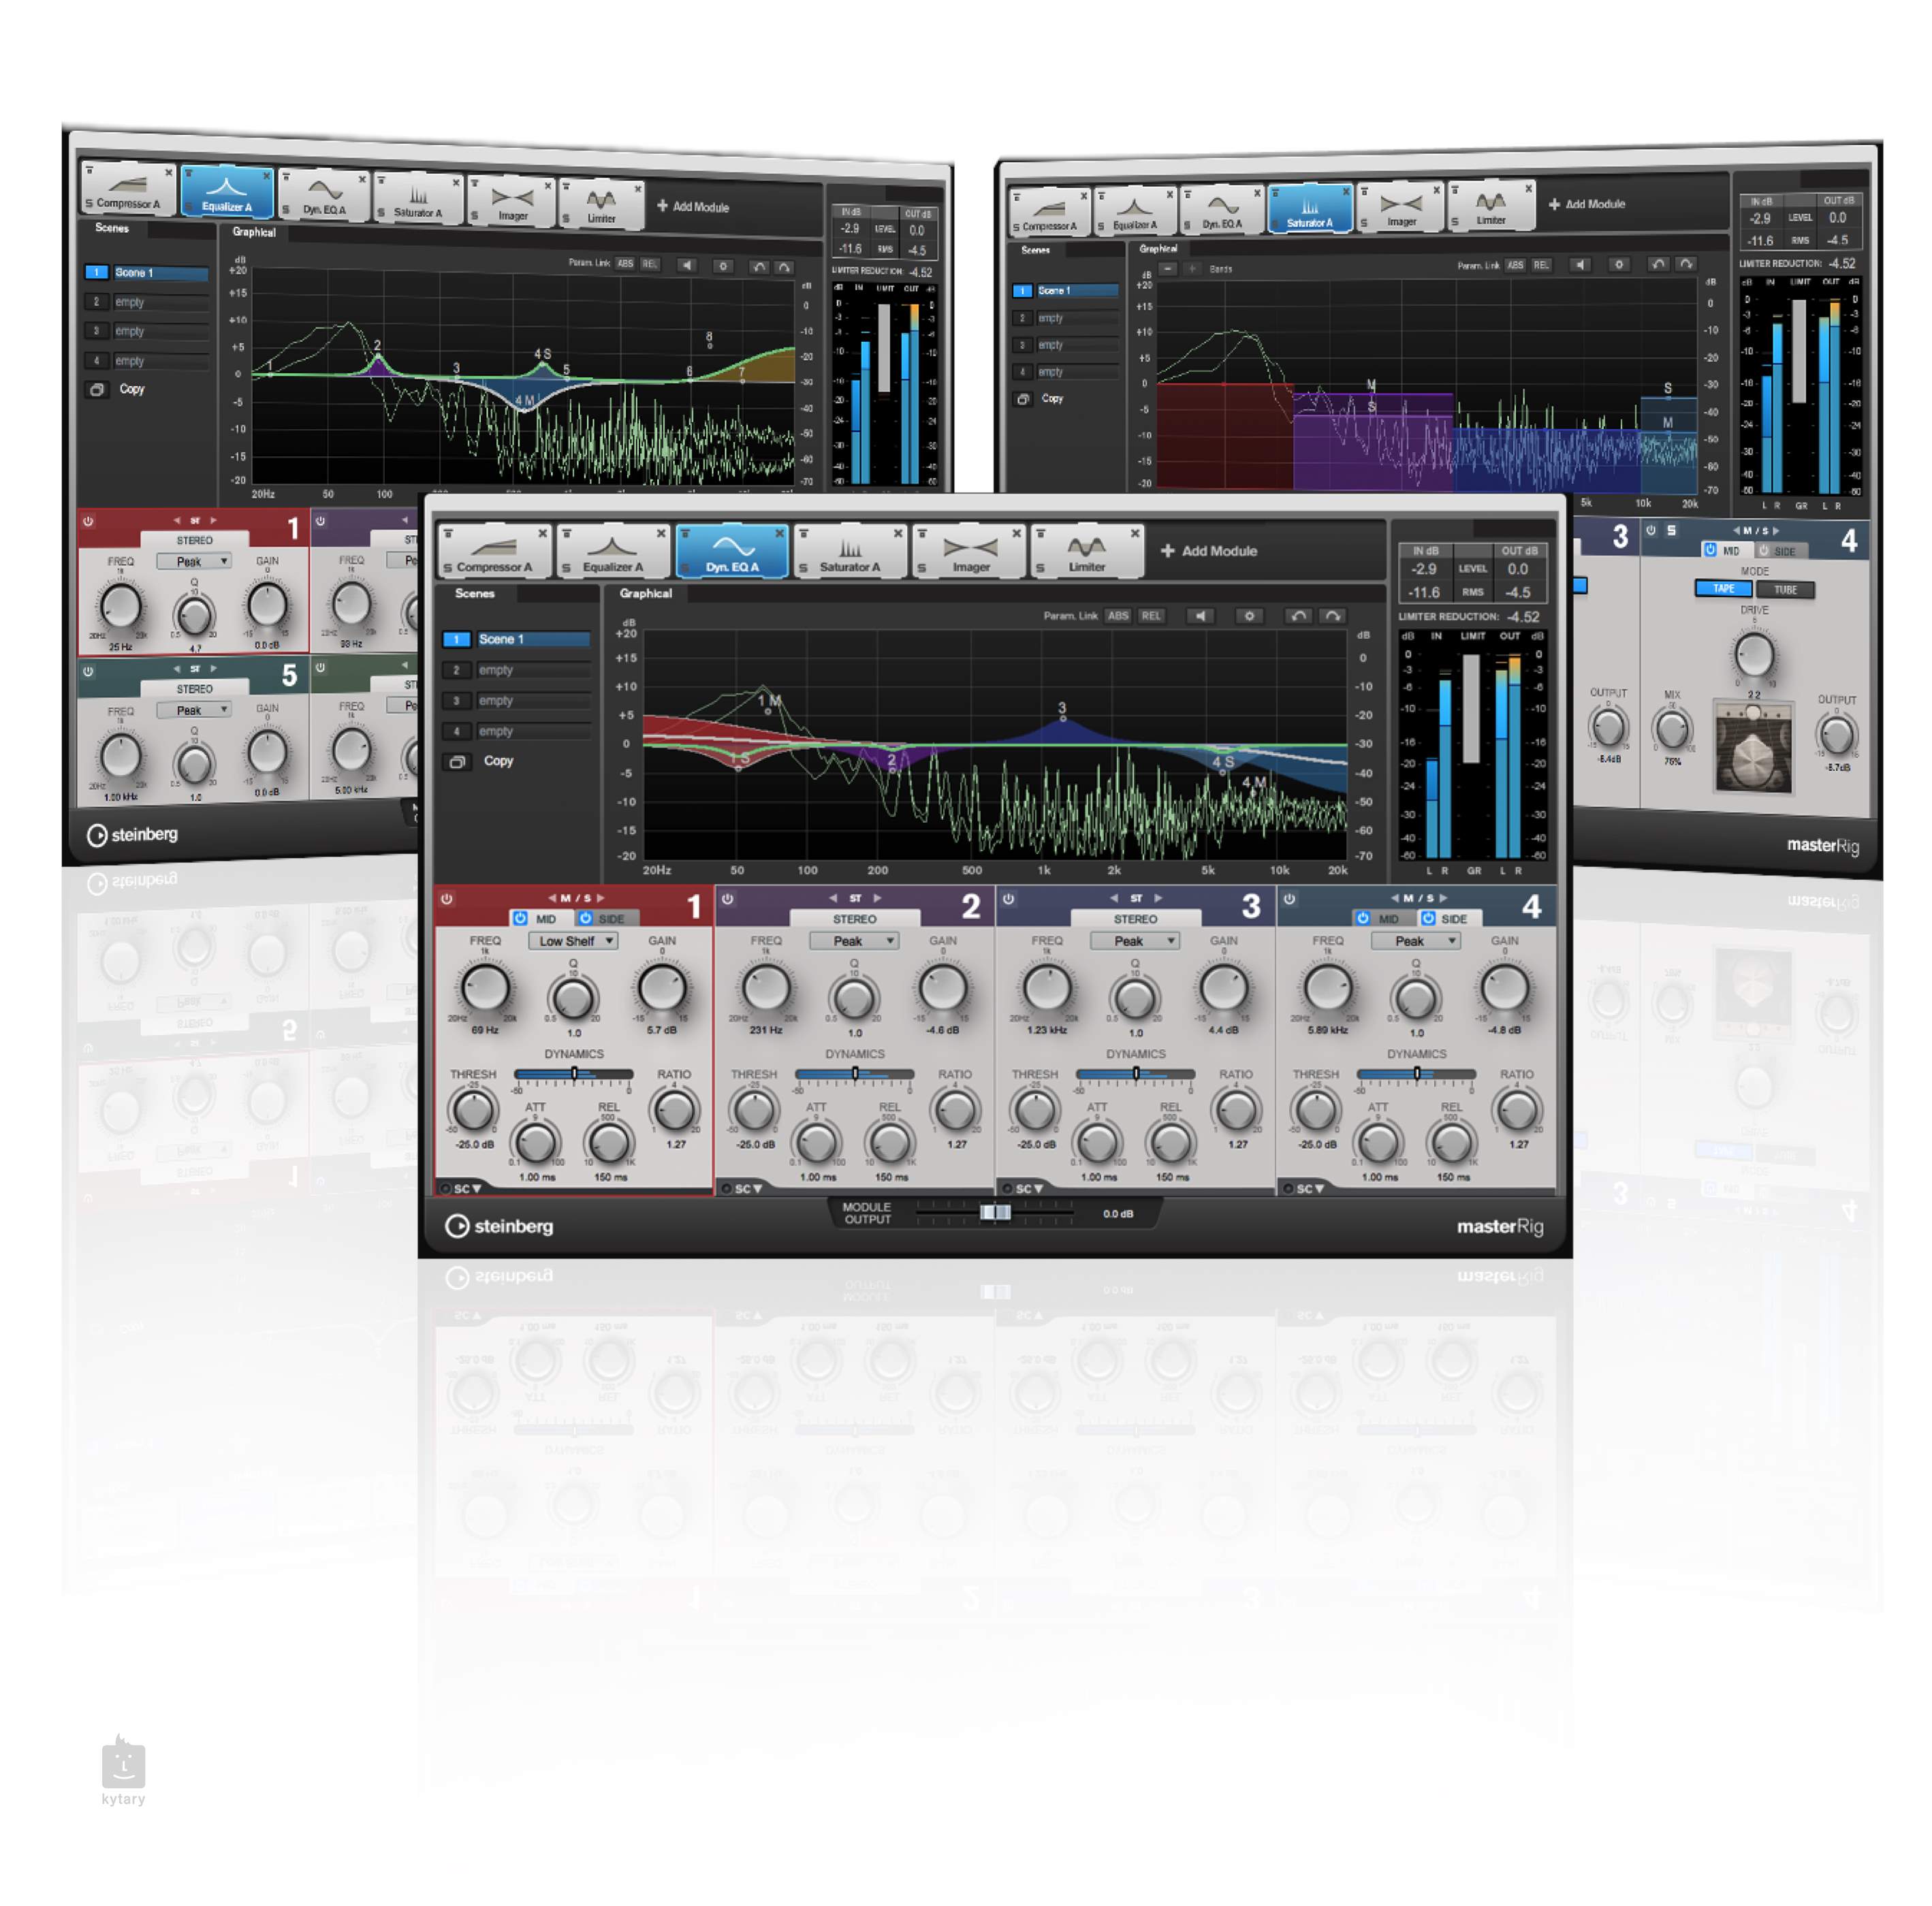 update to wavelab pro 9 from 8.5